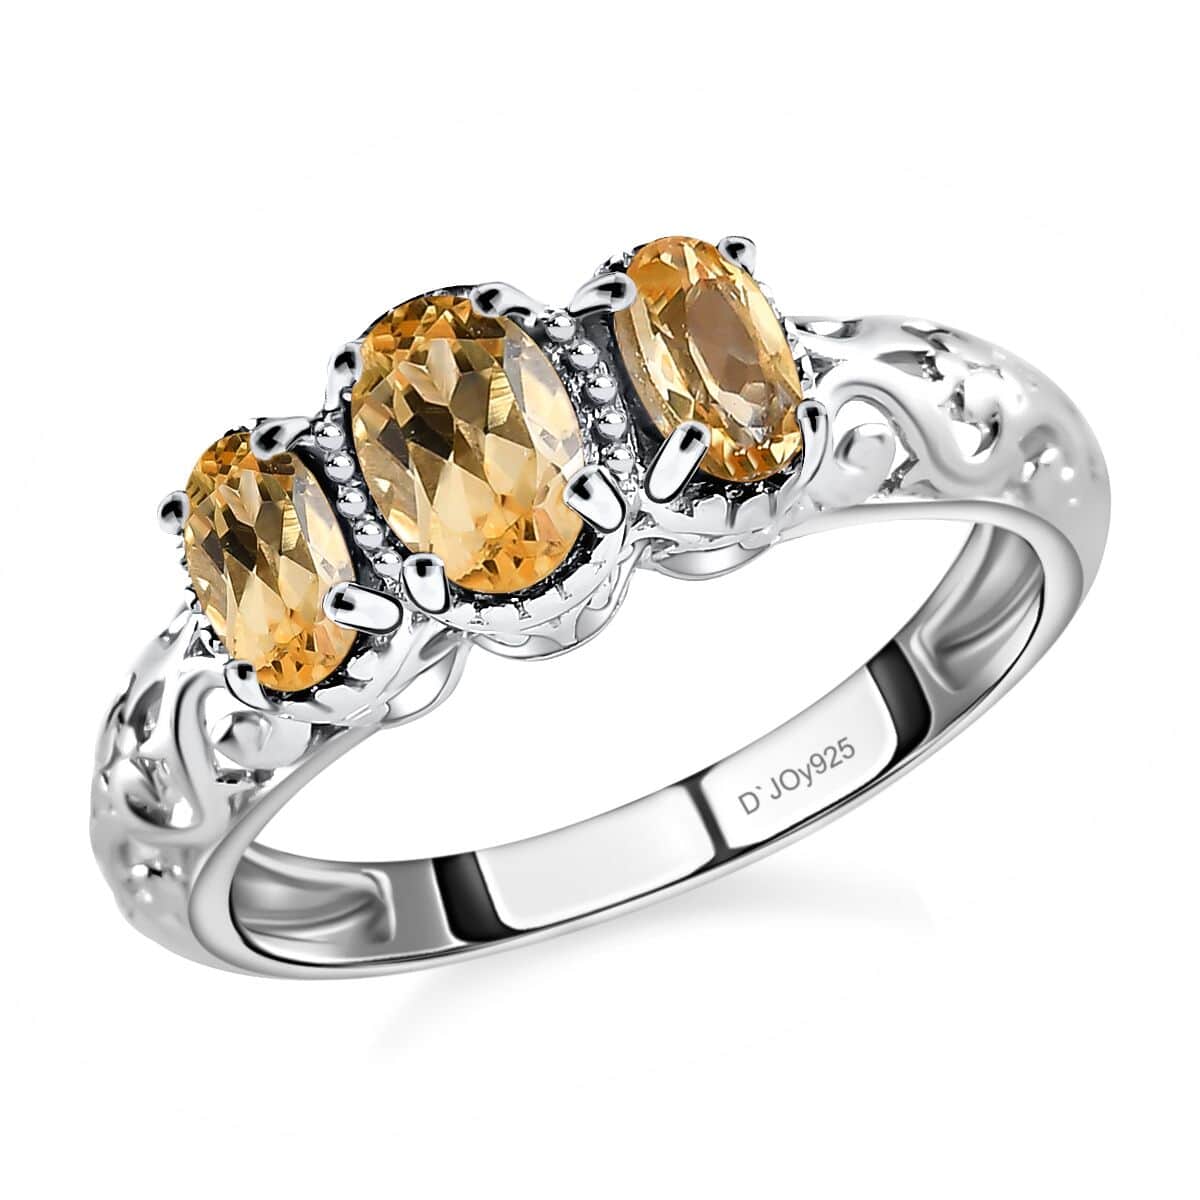 Citrine Ring, 3 Stone Citrine Ring, Trilogy Ring, Sterling Silver Ring, Birthstone Jewelry, Brazilian Citrine 3 Stone Ring 0.90 ctw (Size 10.0) image number 0